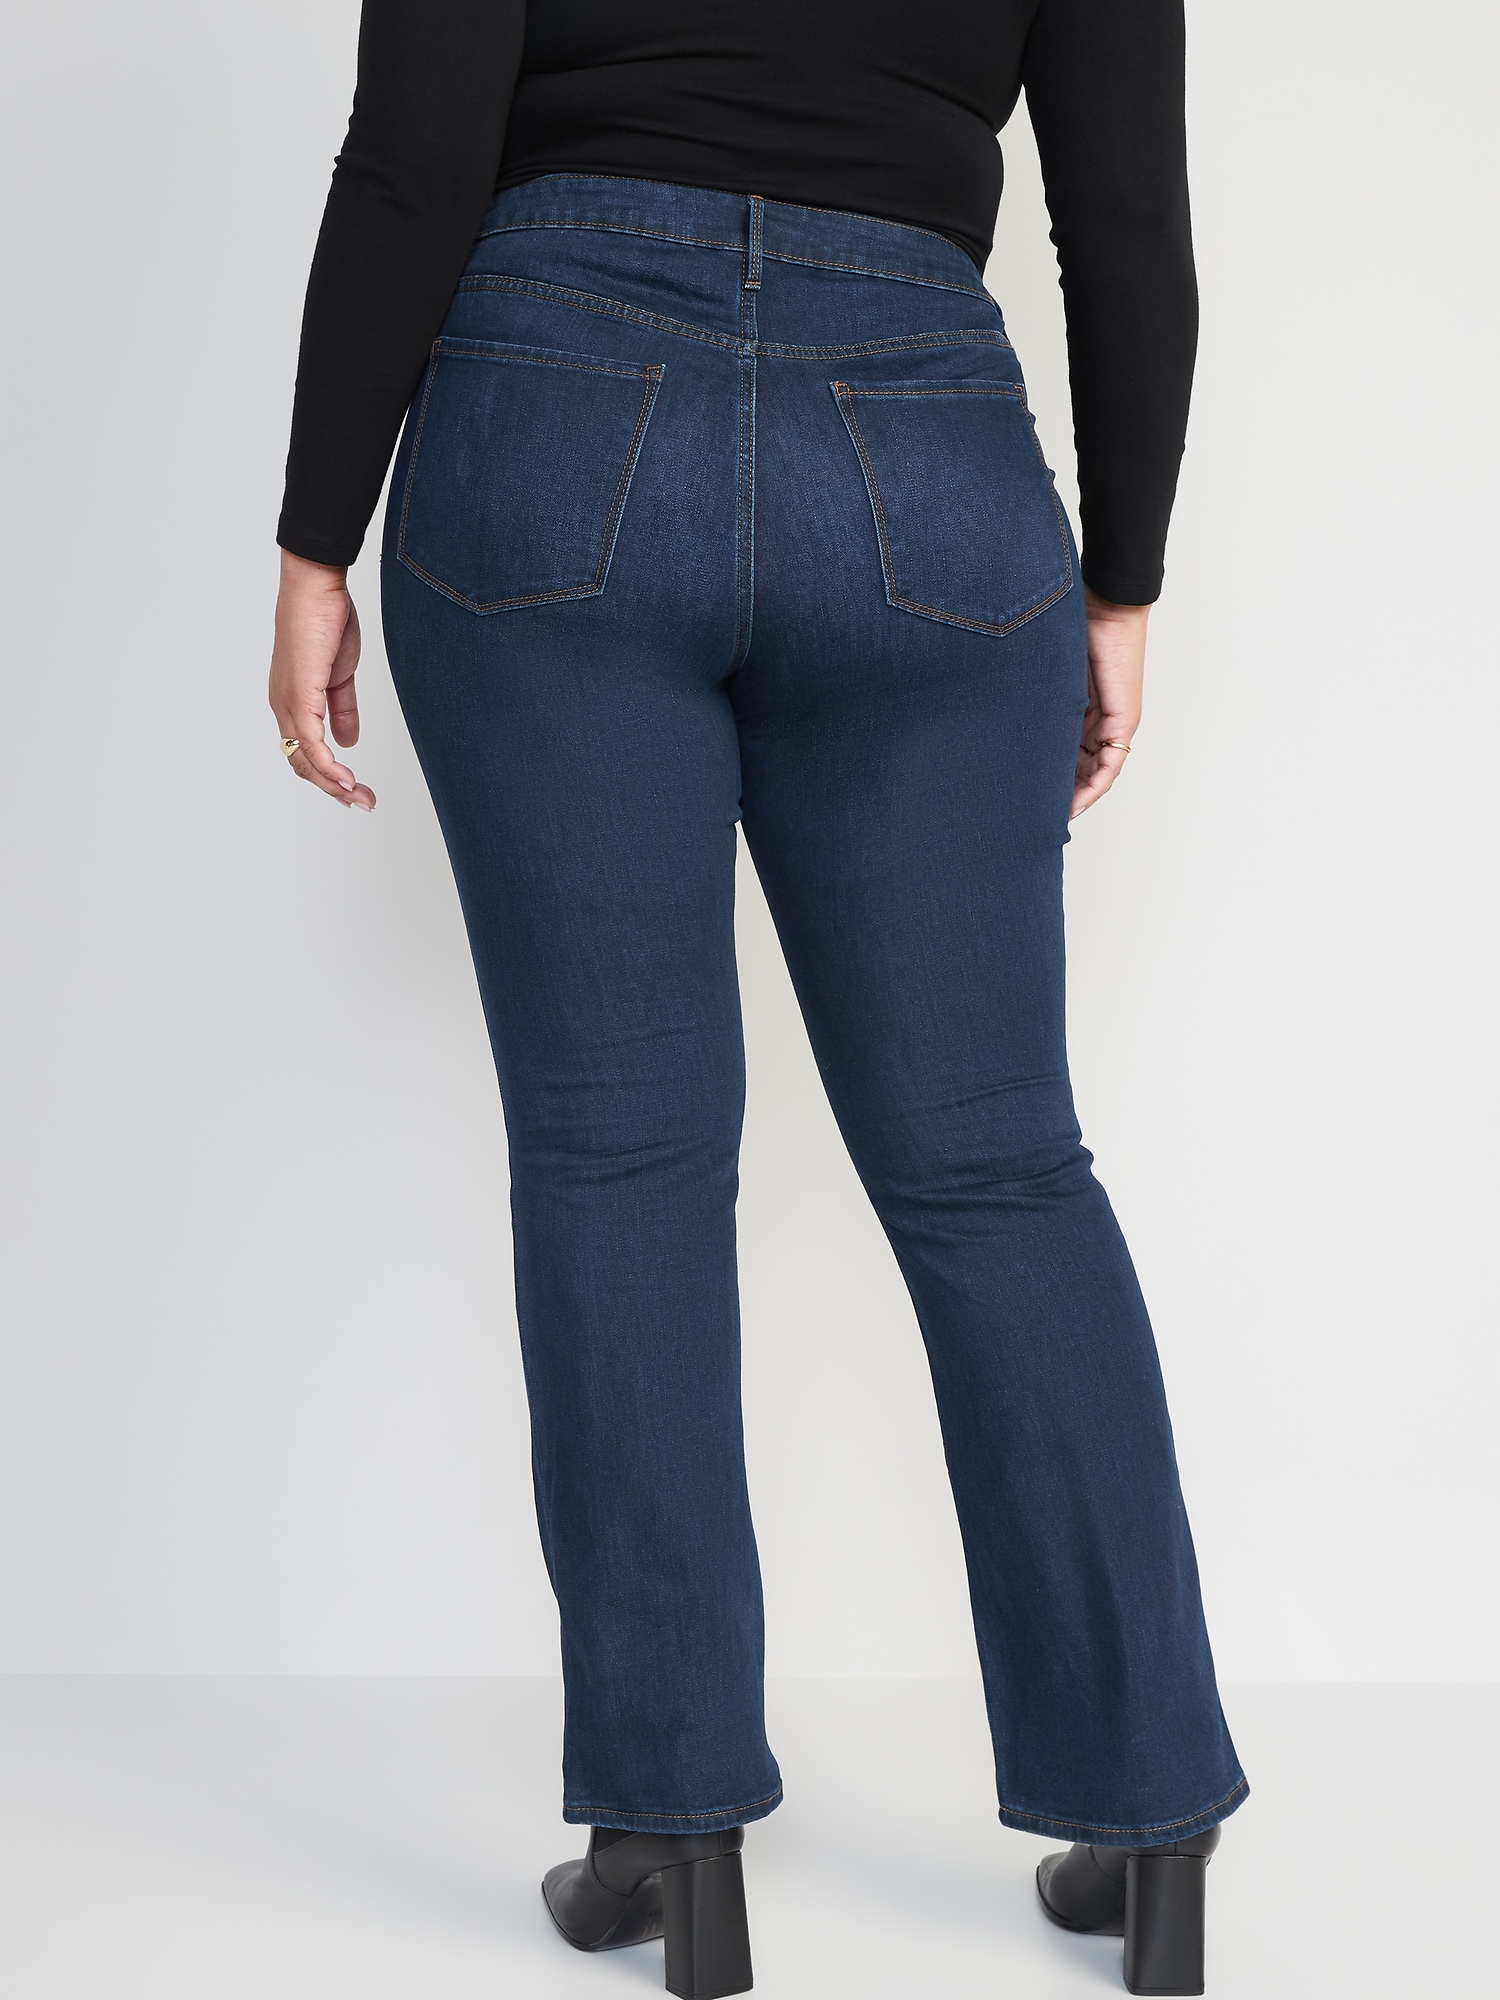 Old Navy Kens boot Cut jeans - analoggulf.com